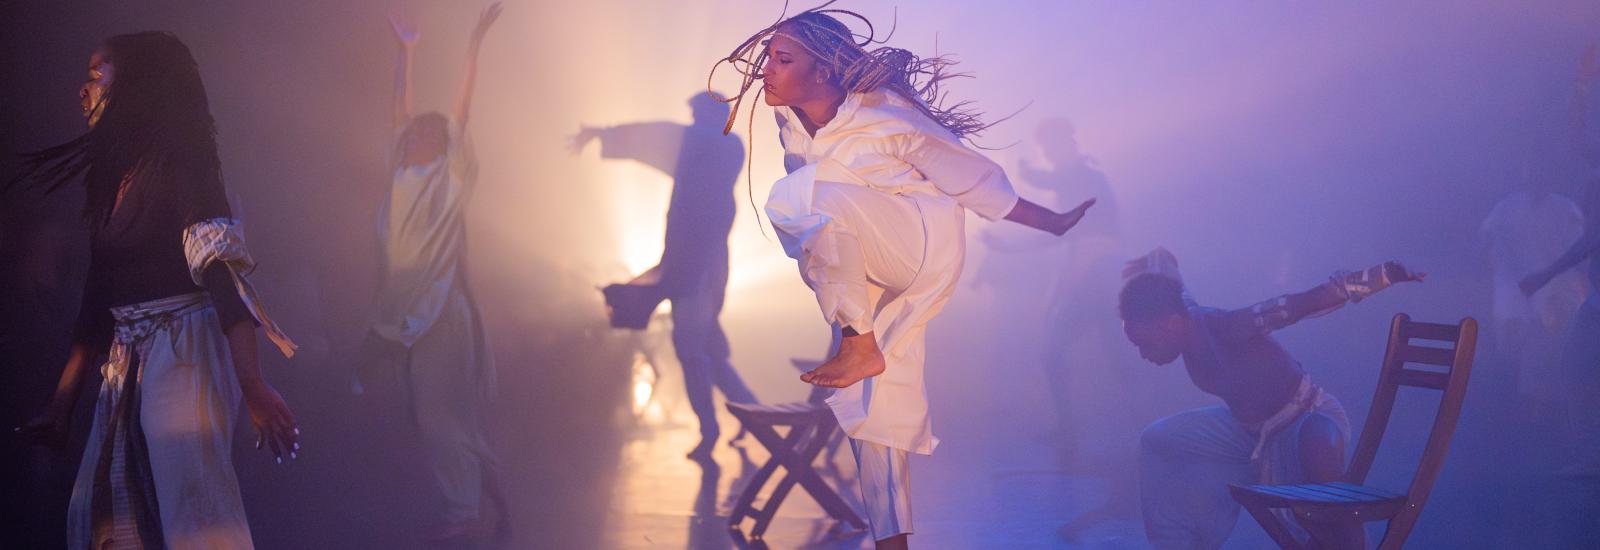 person leaping in white costume